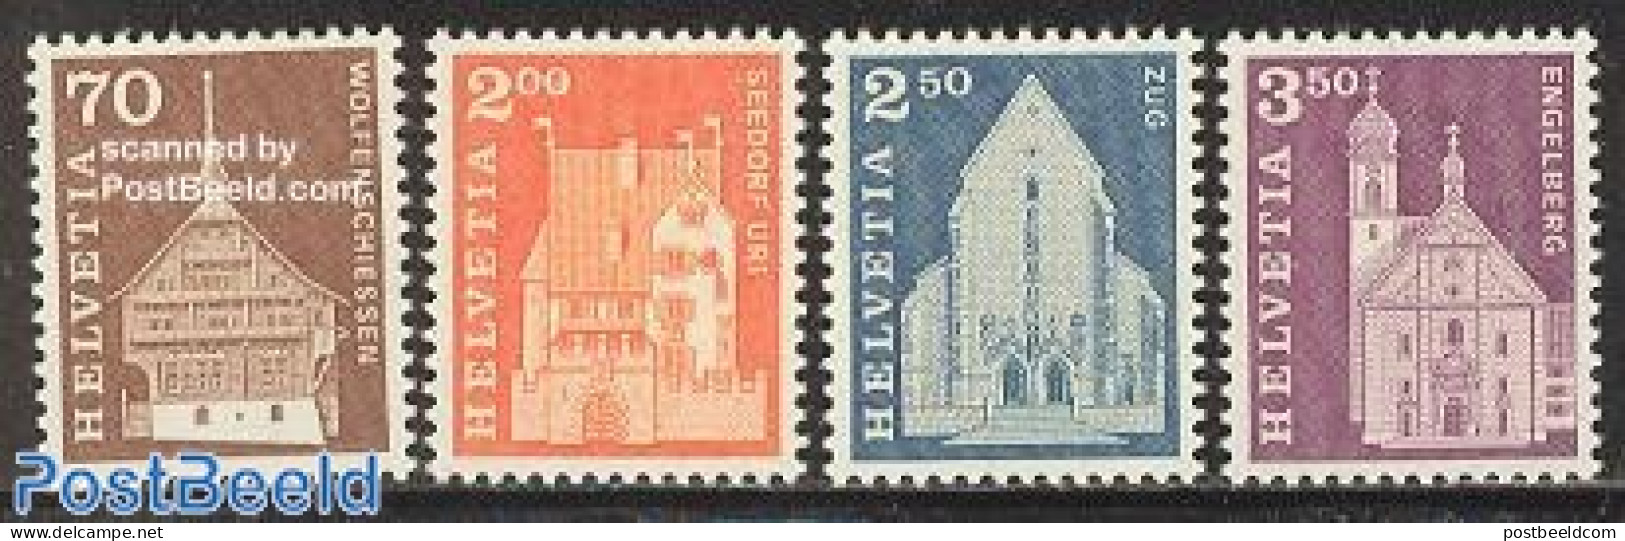 Switzerland 1967 Definitives 4v, Mint NH, Religion - Churches, Temples, Mosques, Synagogues - Cloisters & Abbeys - Art.. - Unused Stamps